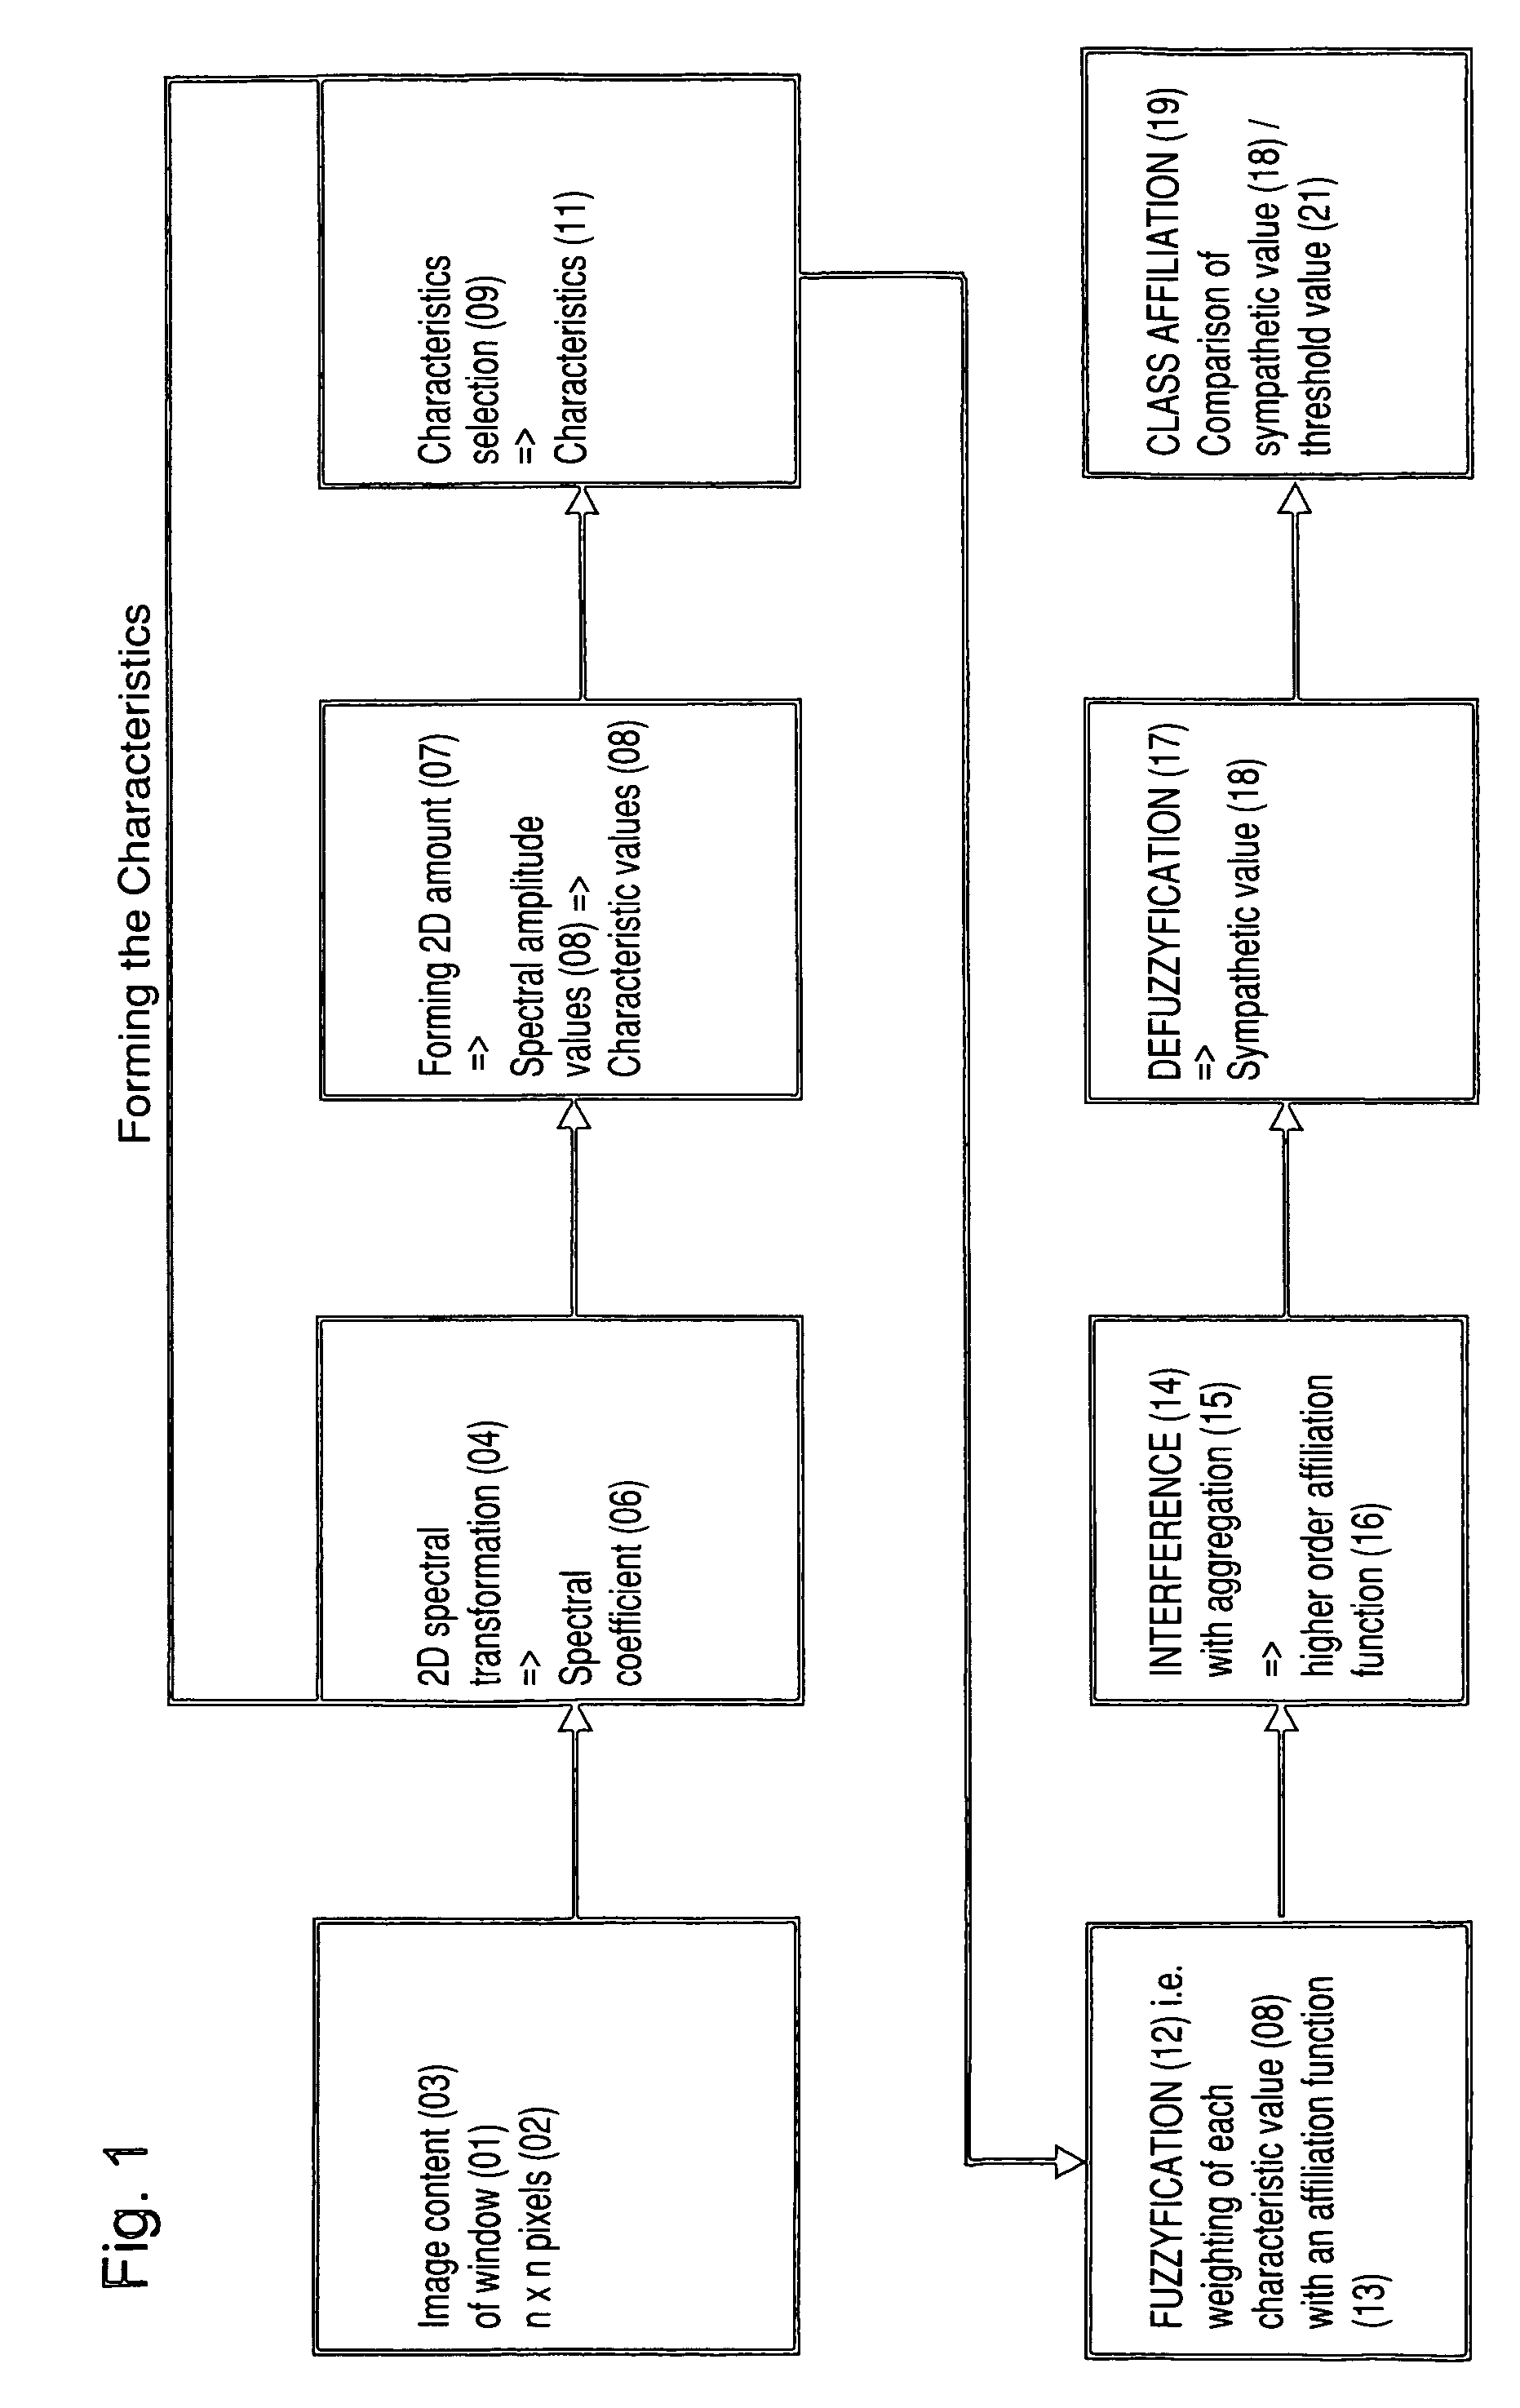 Method for evaluating the signals of an electronic image sensor during pattern recognition of image contents in a test piece